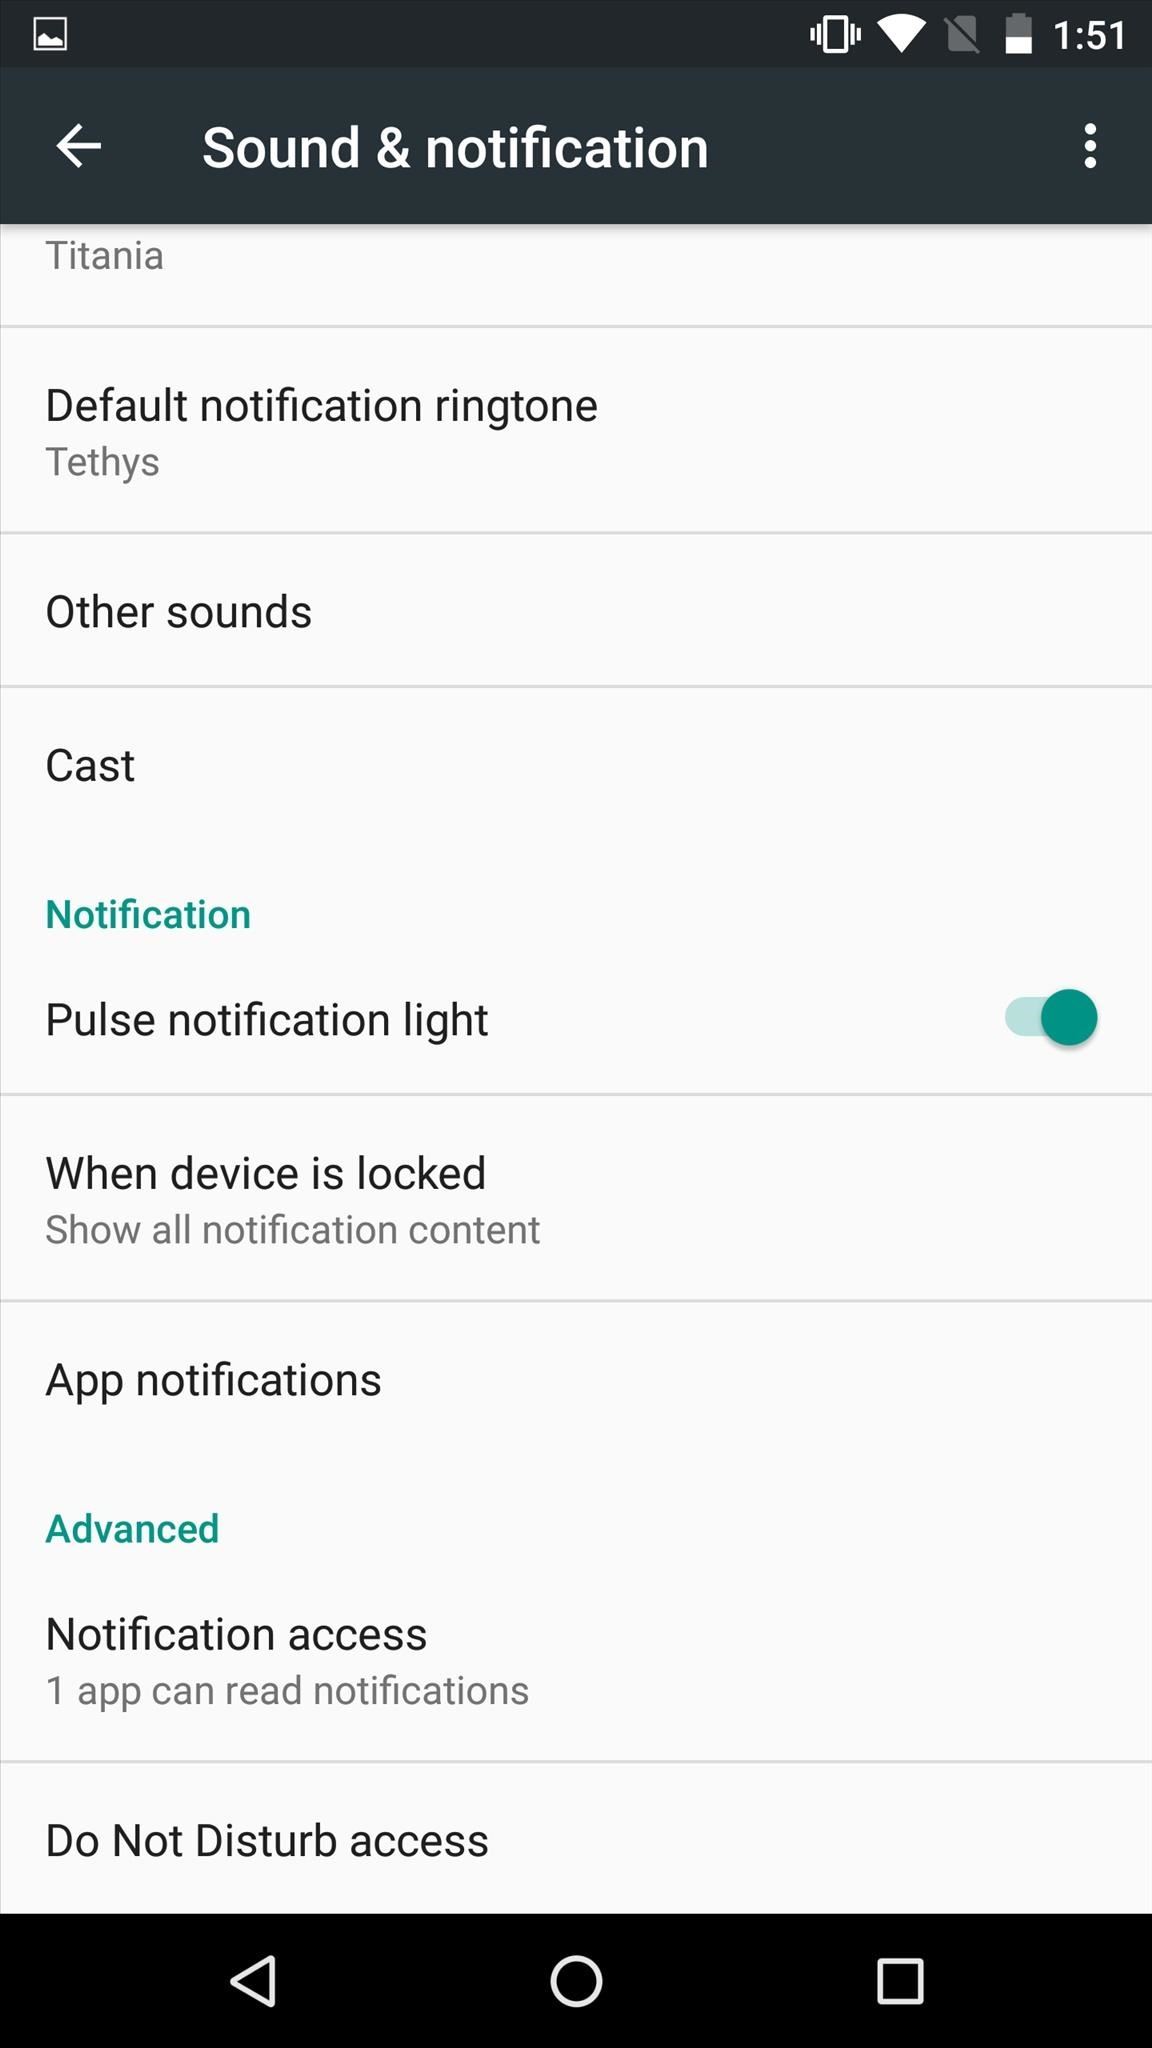 How to Completely Customize the LED Notification Colors on Your Nexus 5X or 6P Without Rooting